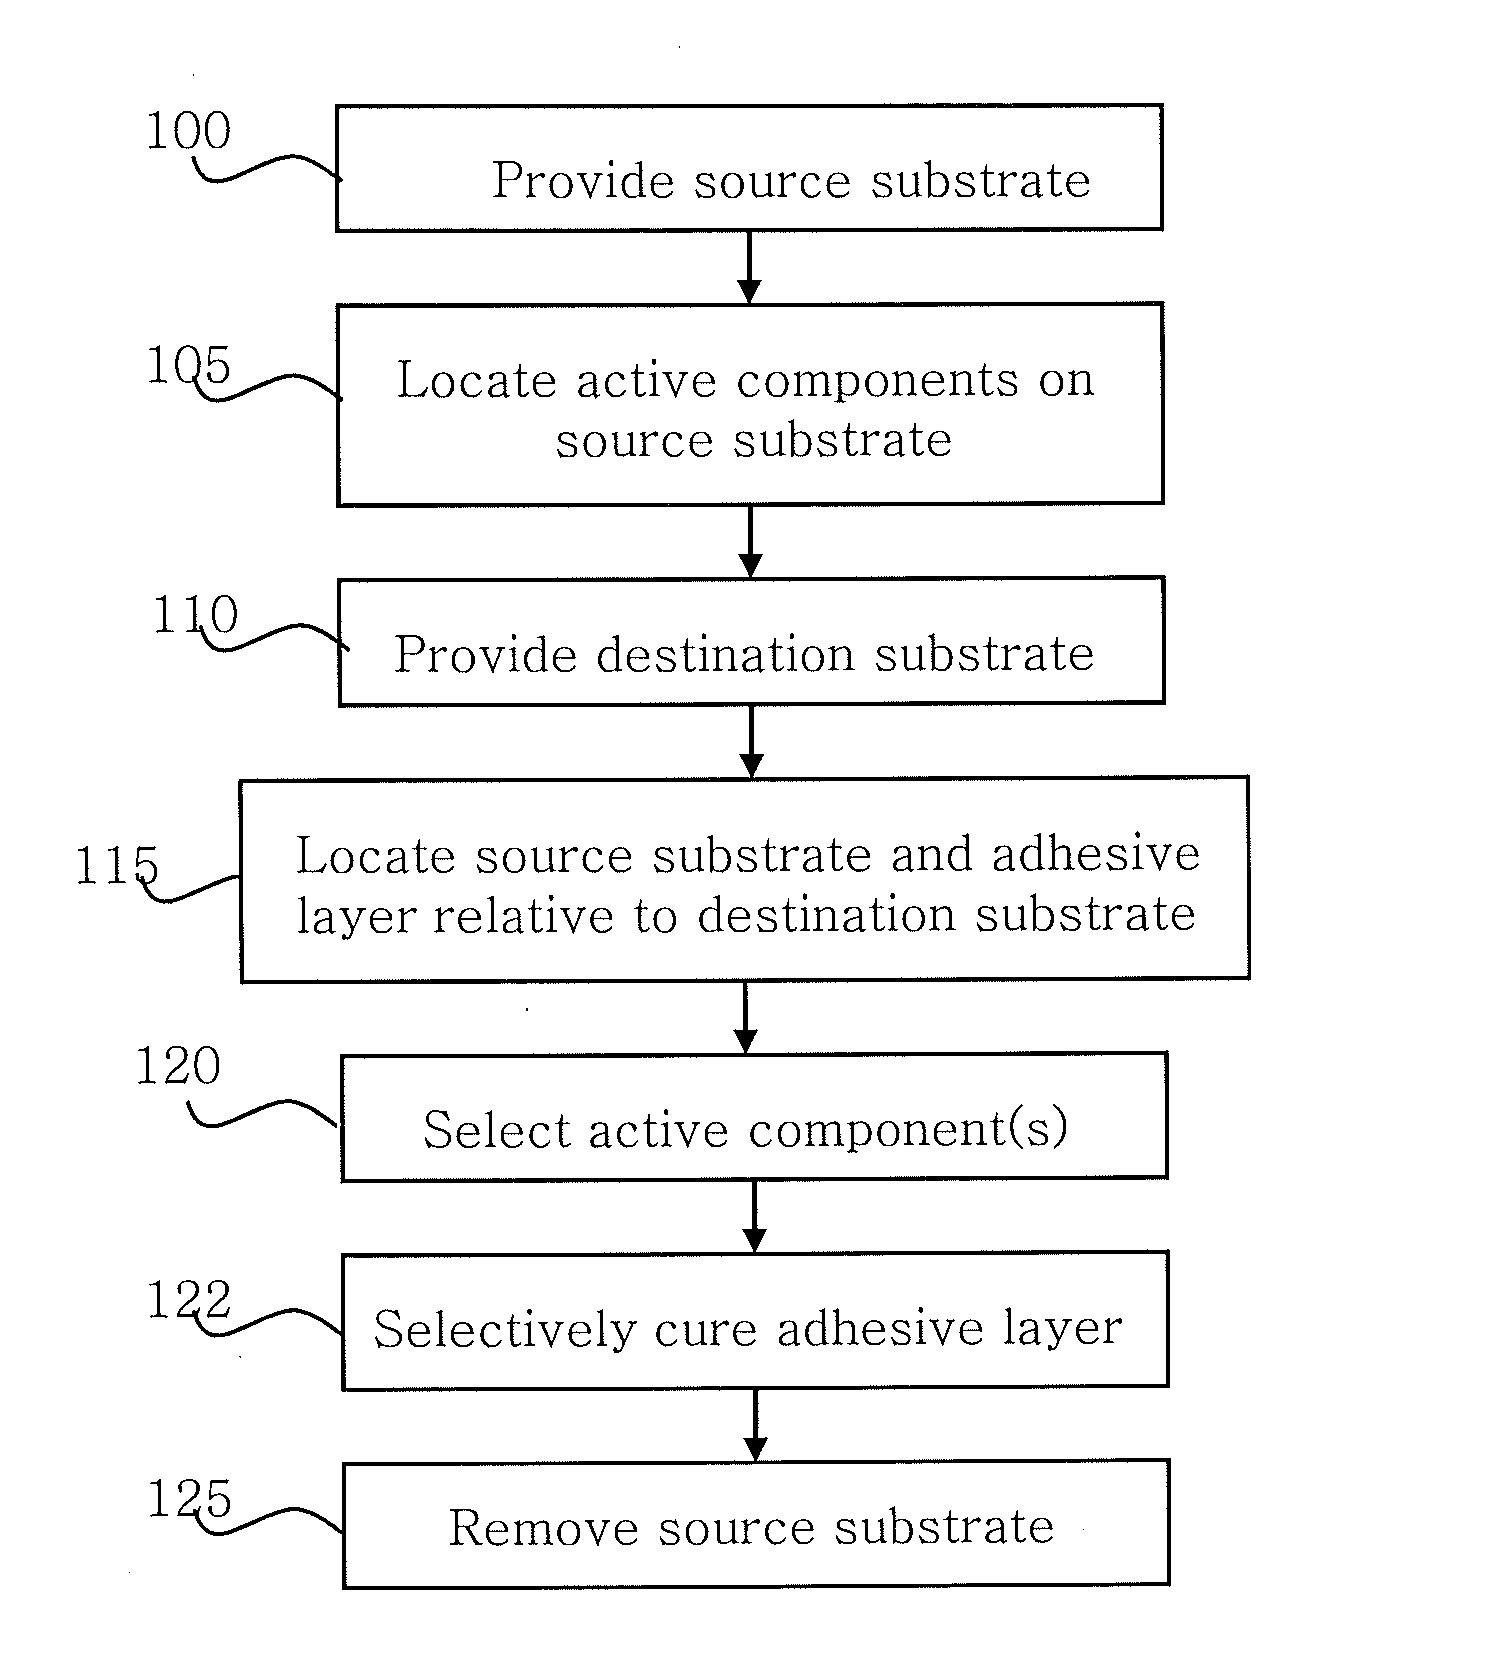 Selective transfer of active components